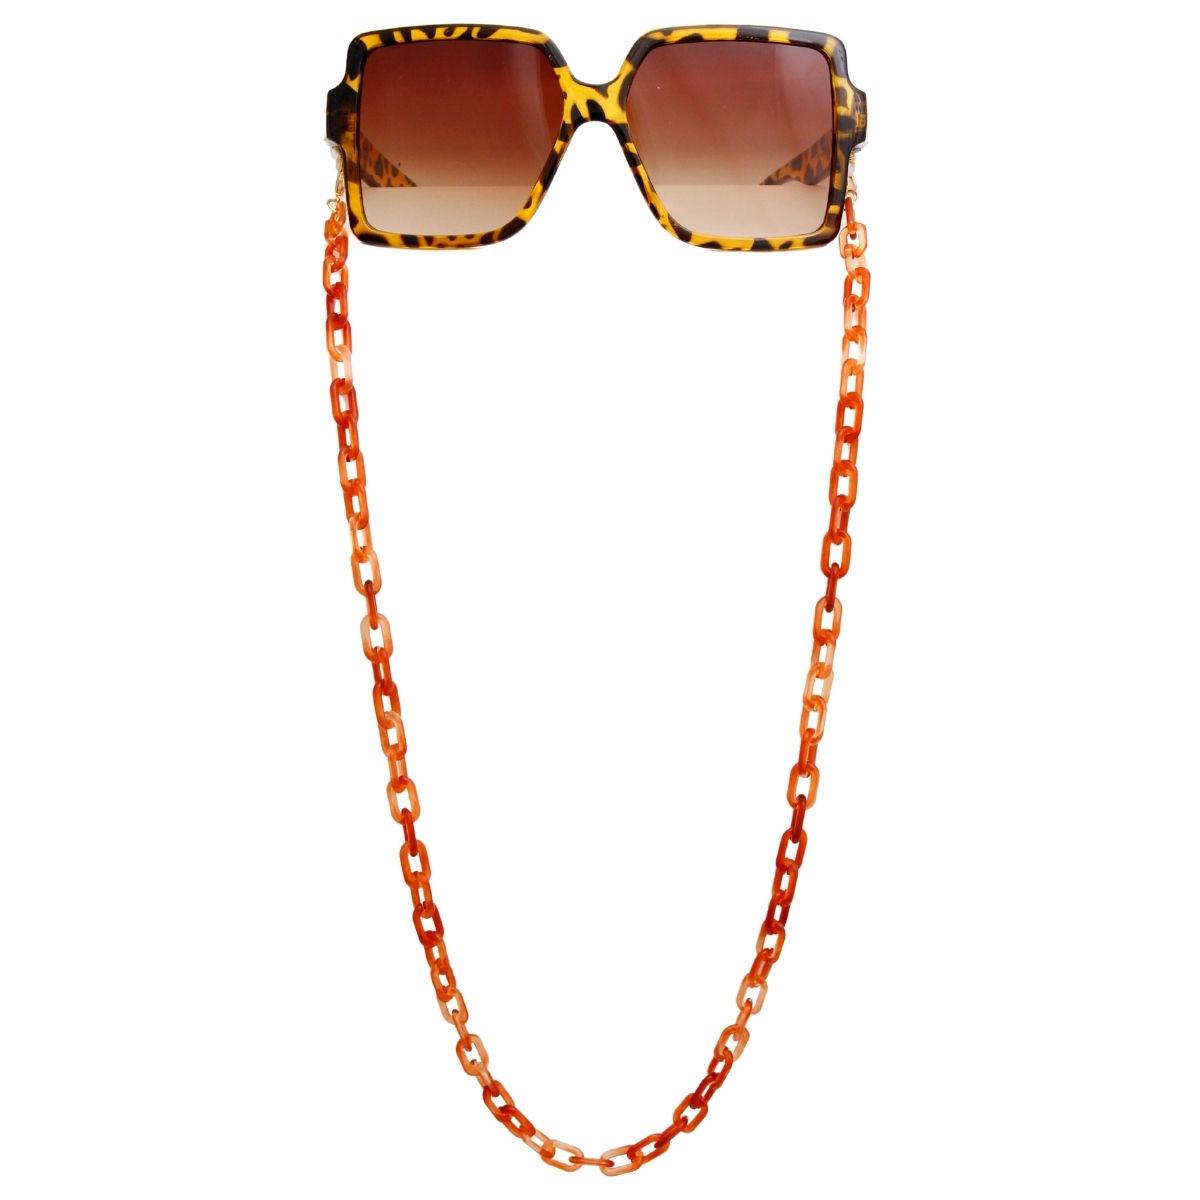 Affordable & Chic Sunglass Chain: Don't Miss Our Brownish Link